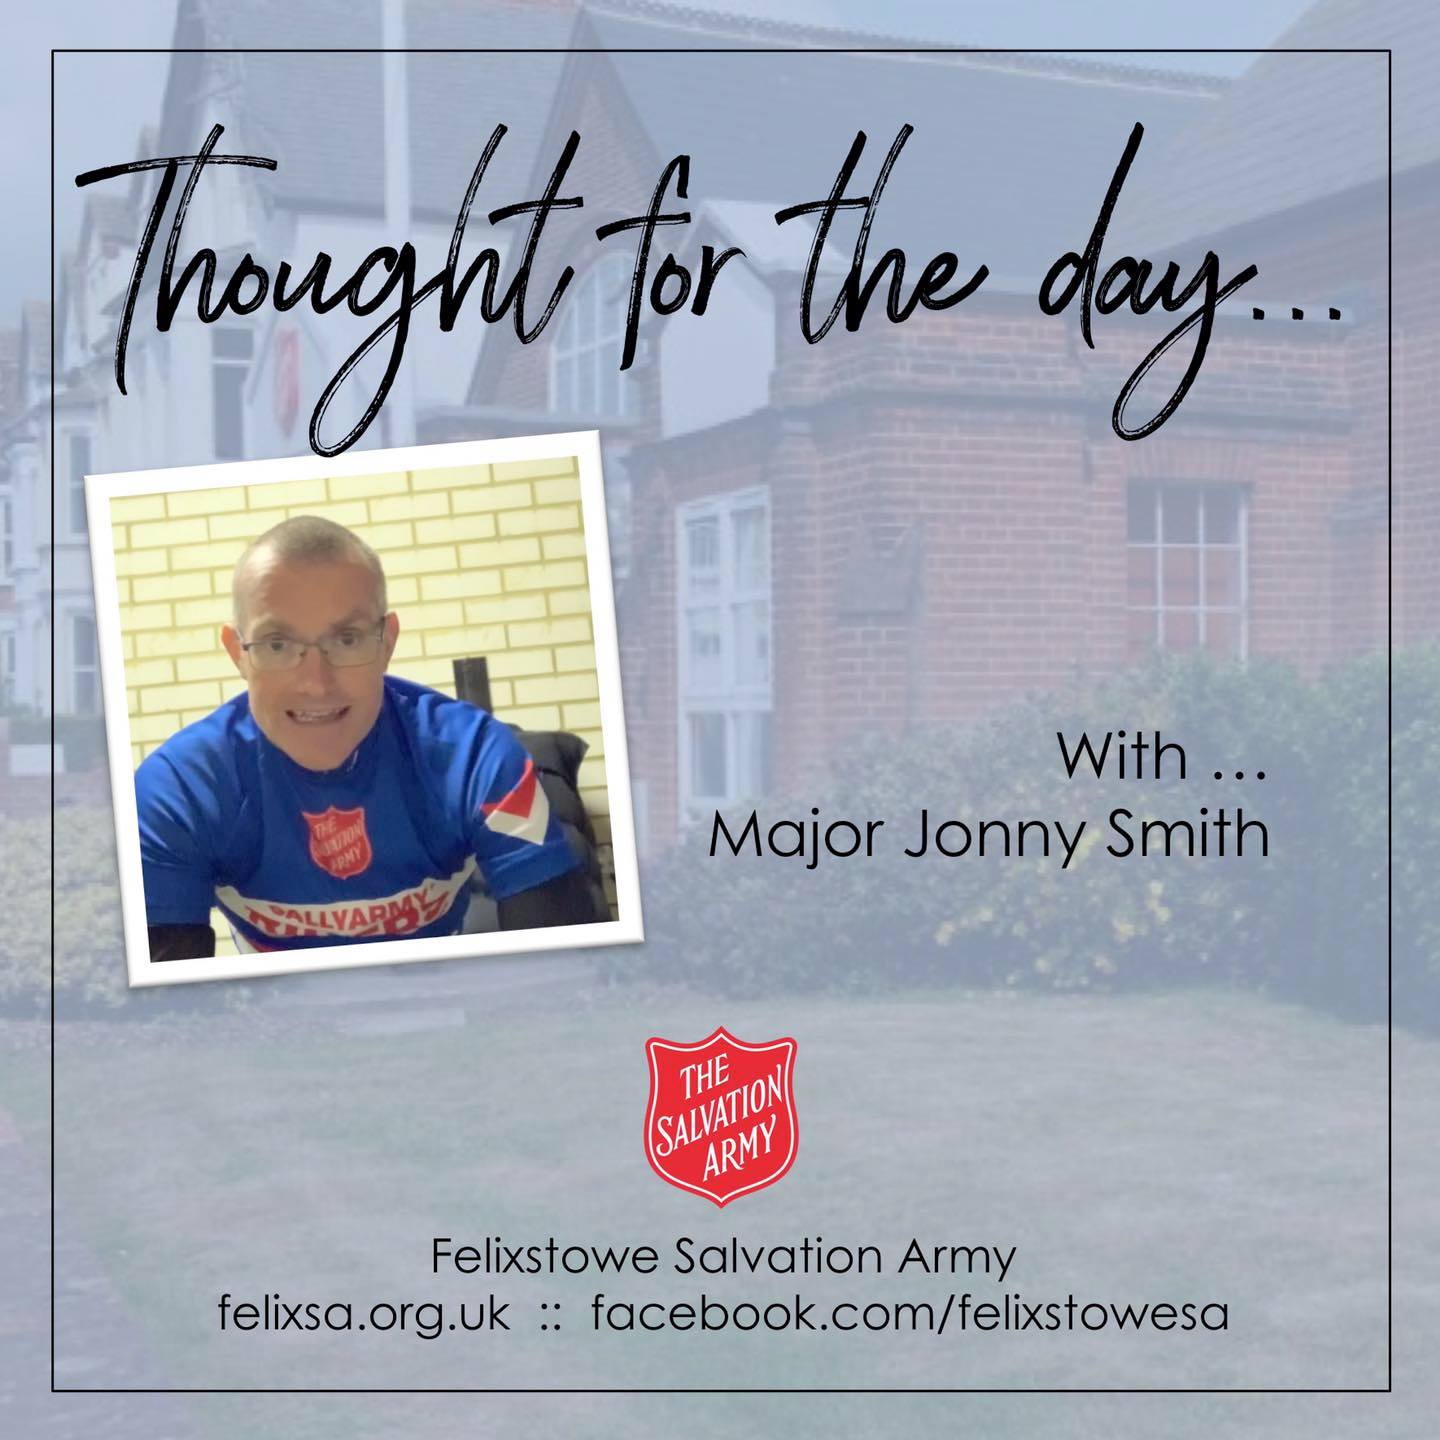 Thought for the Day with Major Jonny Smith